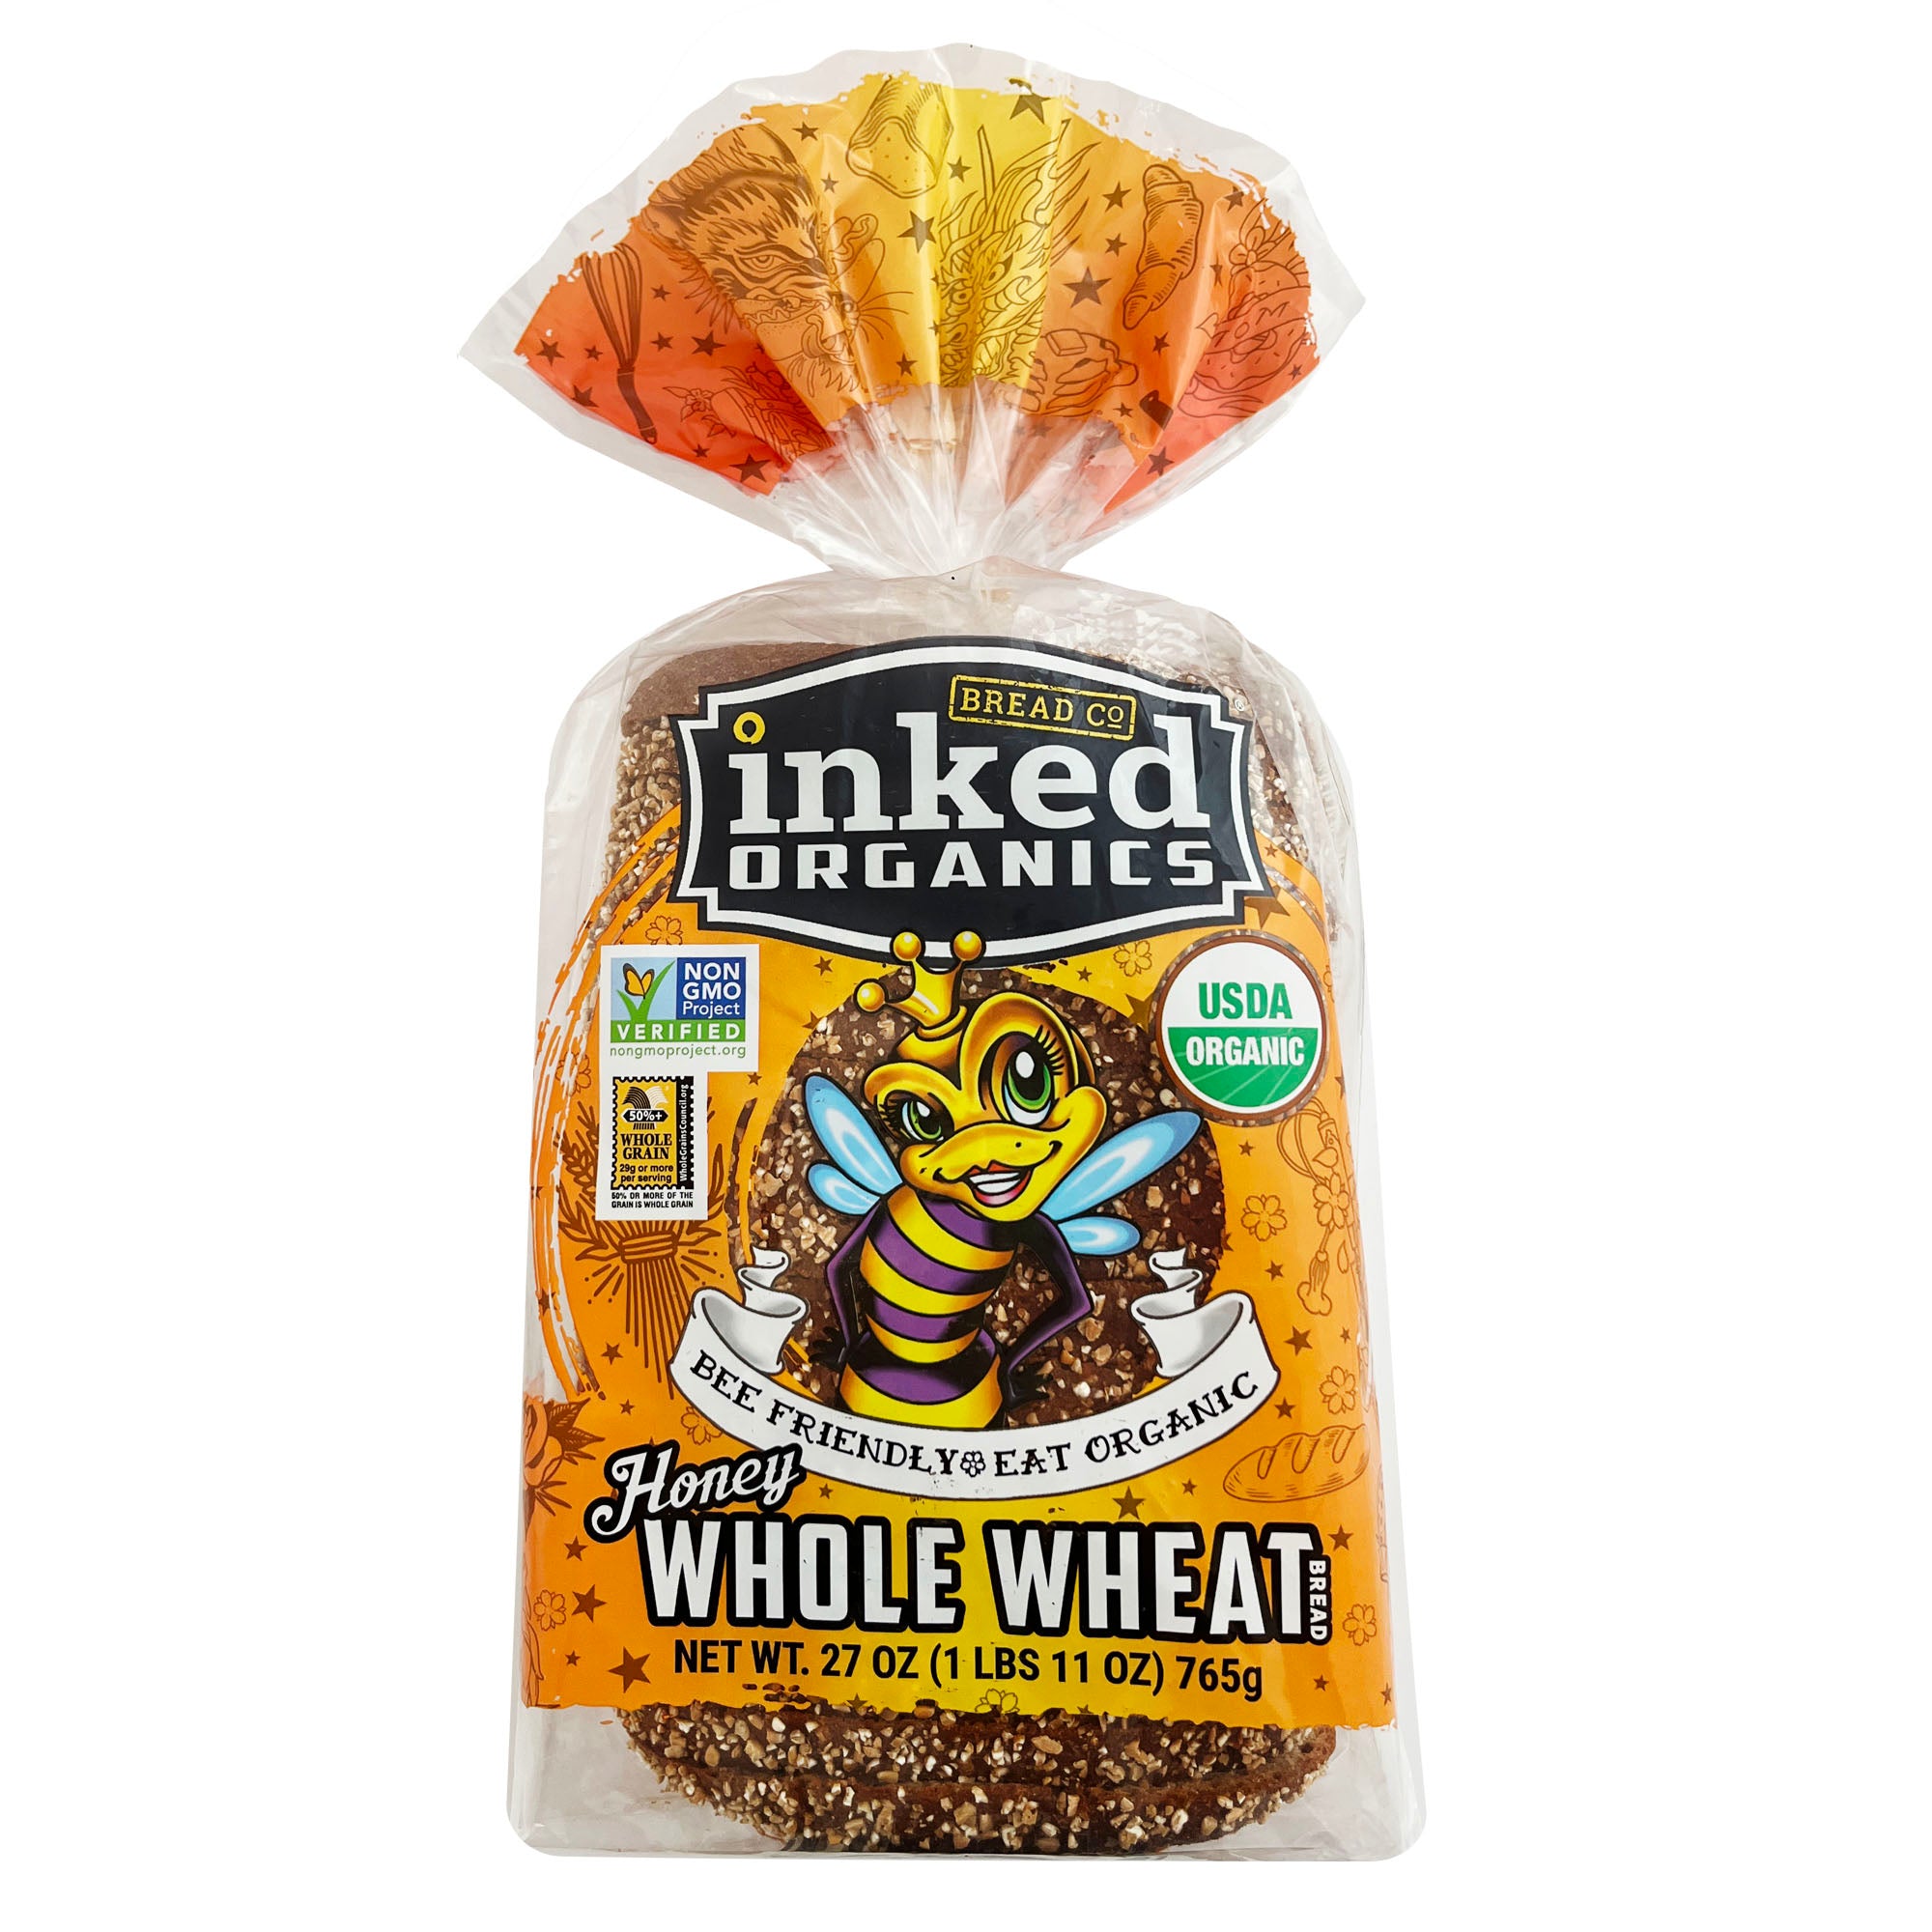 Honey Whole Wheat (Not available for individual sale)